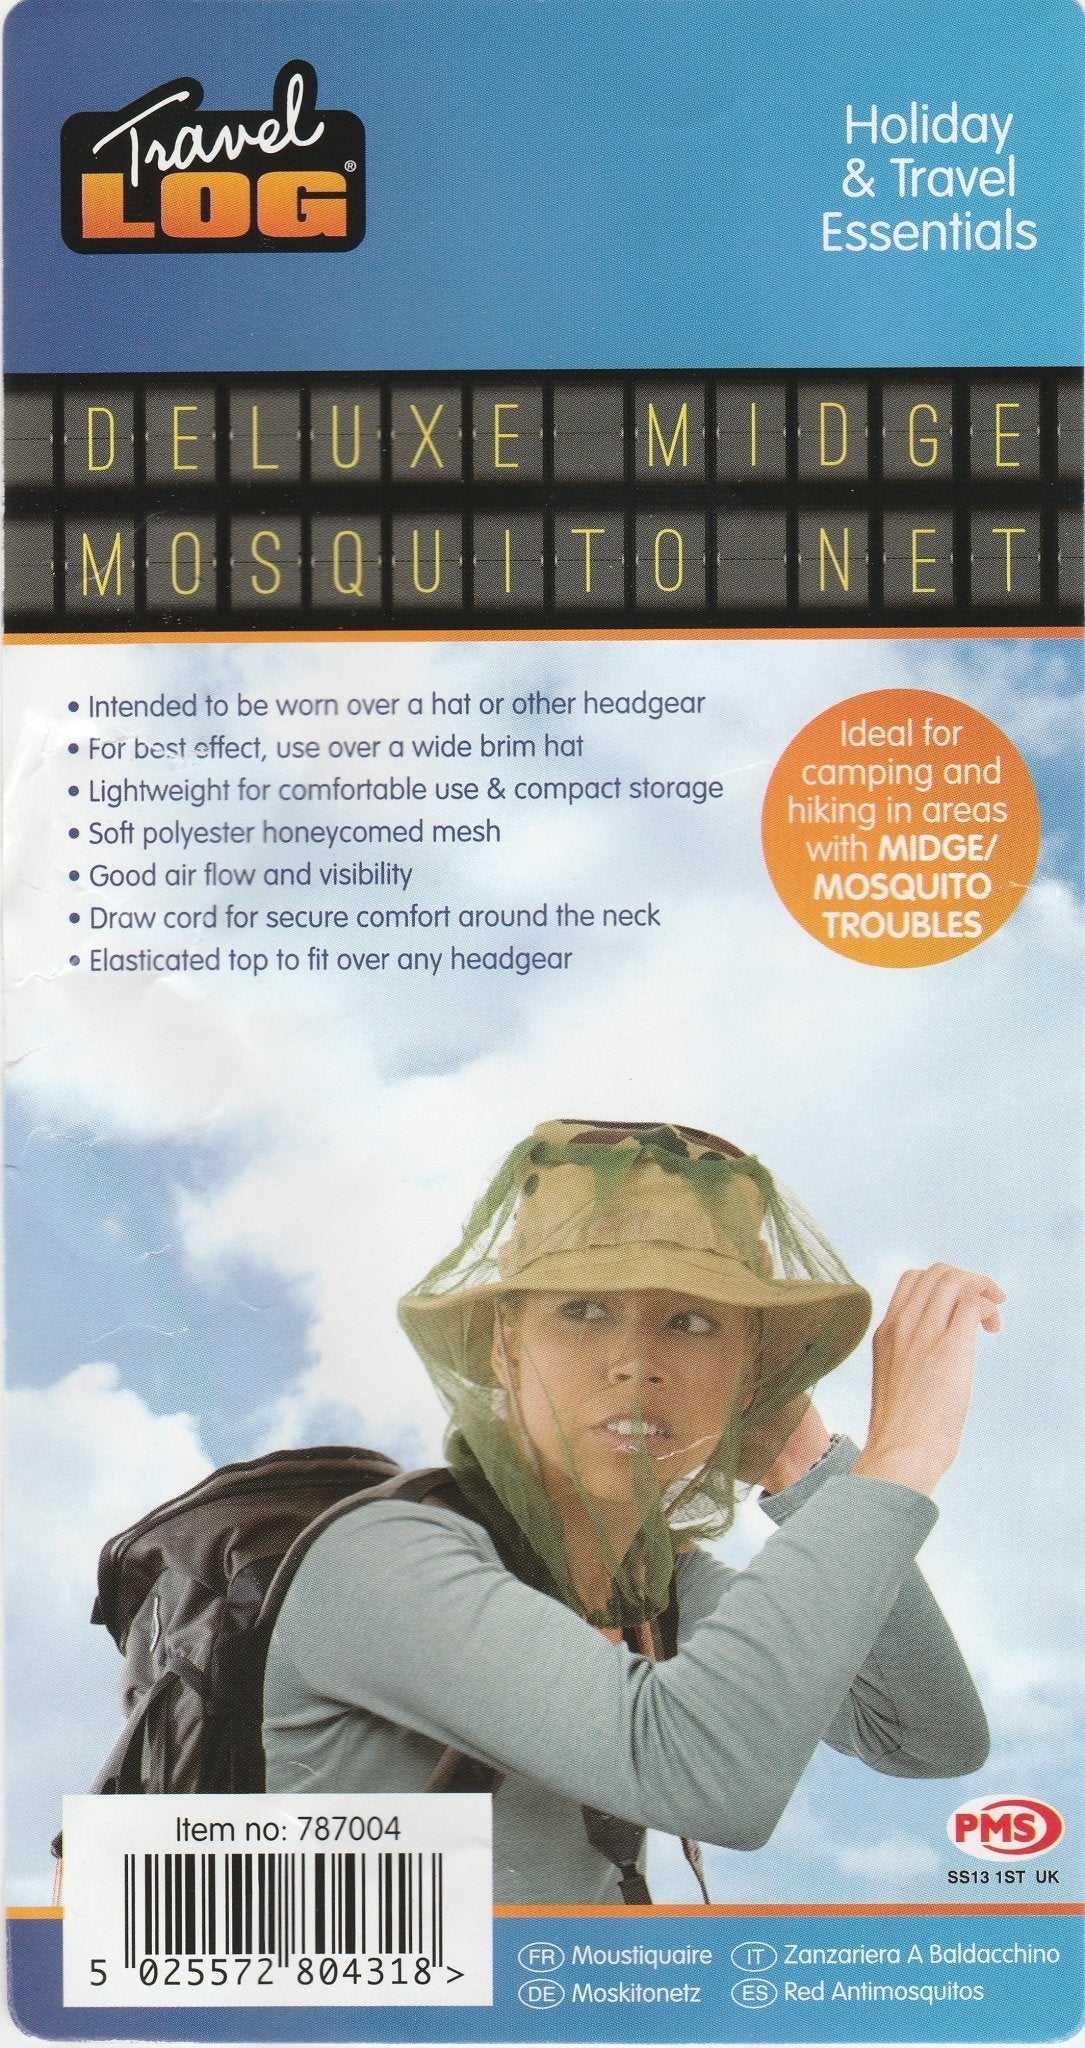 2 x Mosquito head net. Stay comfortable and focused by keeping the insects at bay. Mosquito Head Net Huggins Attic    [Huggins attic]